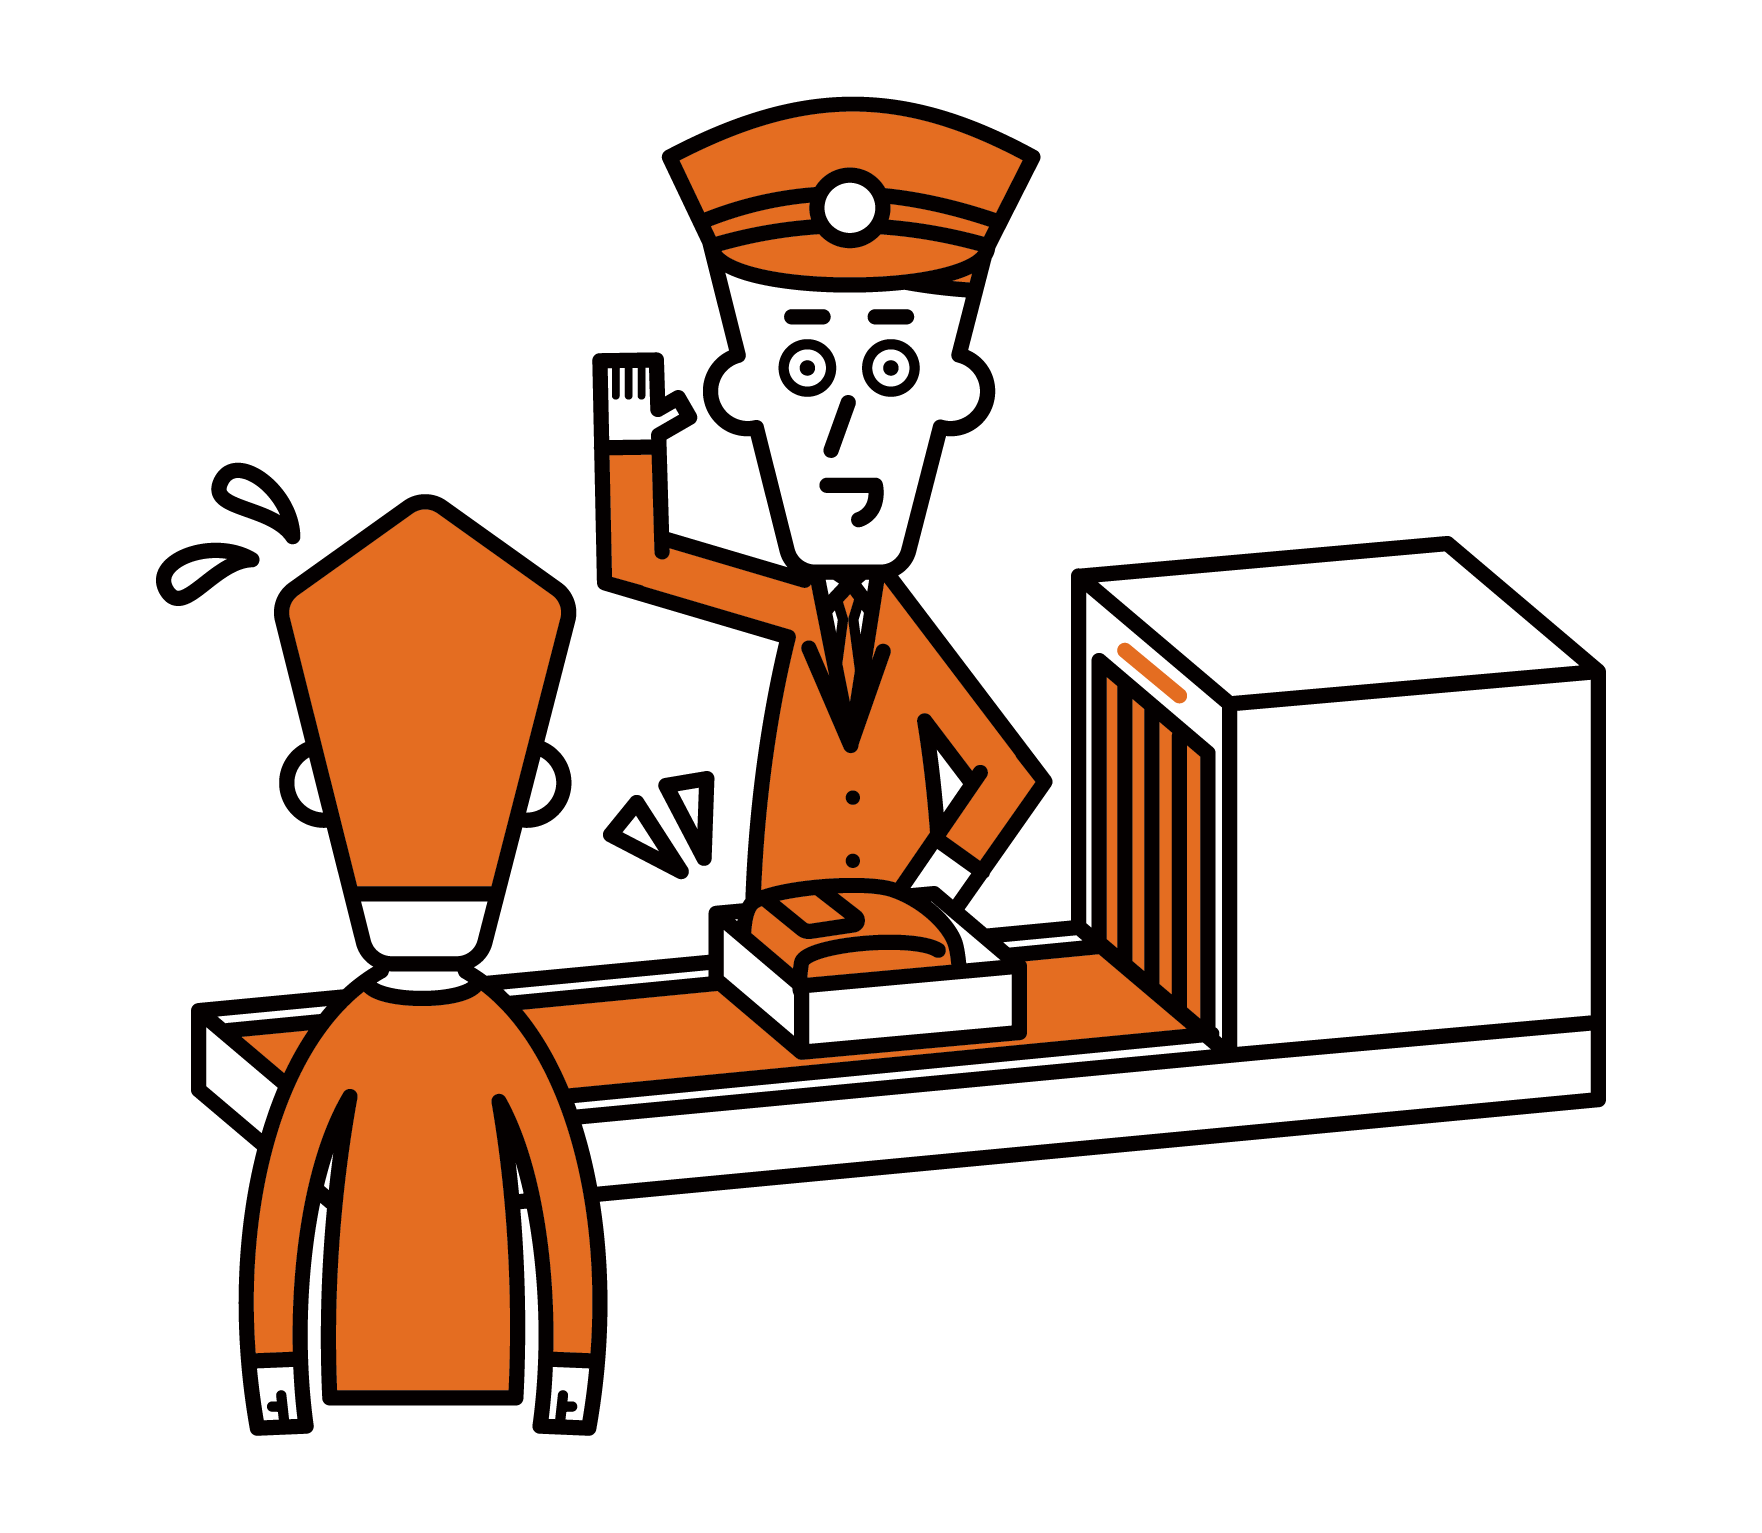 Illustration of a duty official (male) at the airport